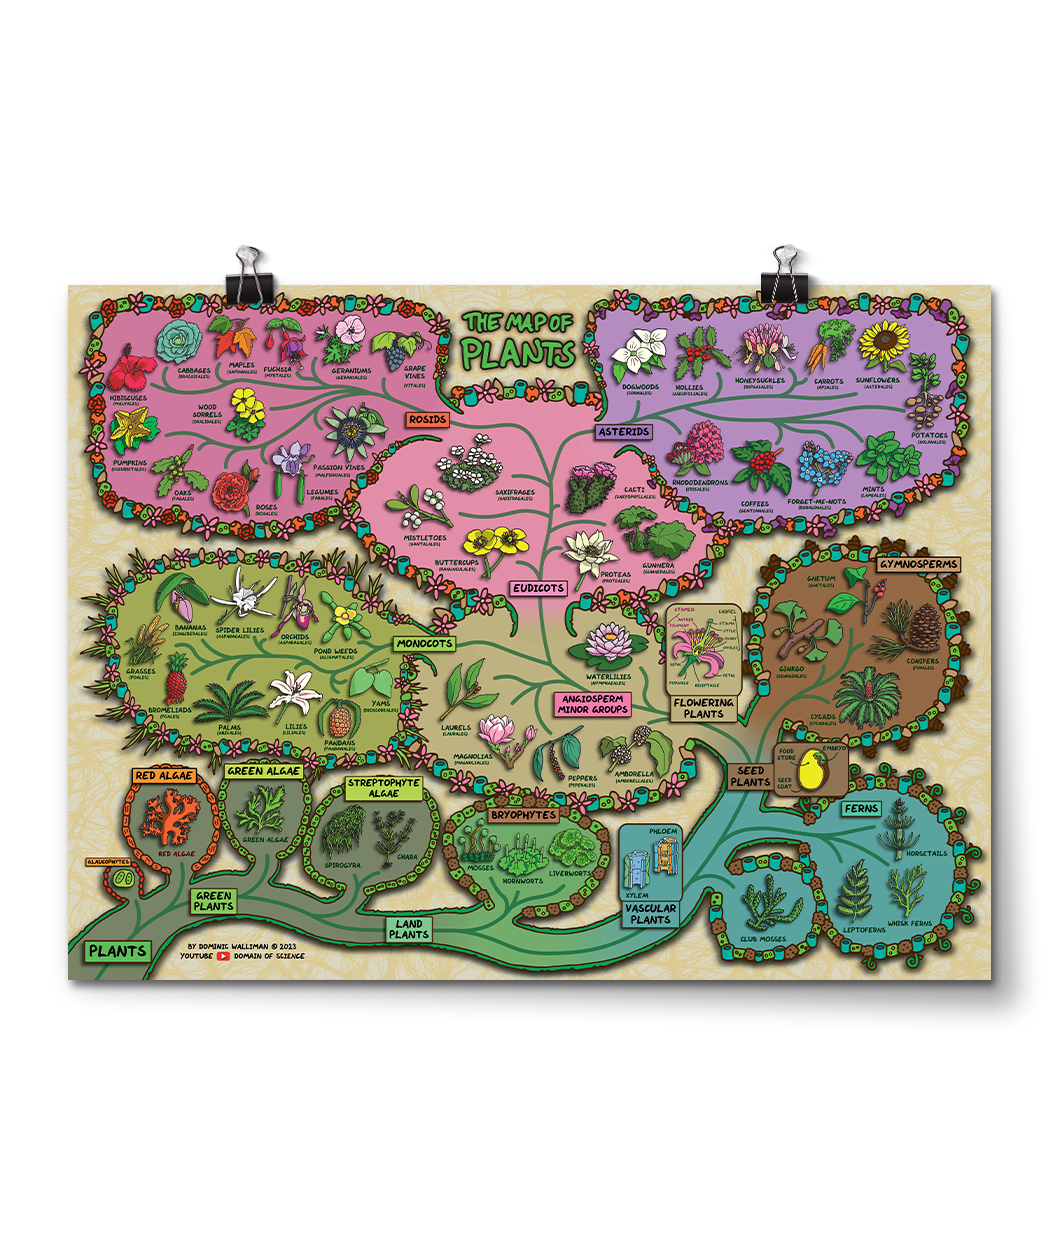 A poster with the title "The Map of Plants" with colorful sections showing different kinds of plants with information about them. From Domain of Science. 